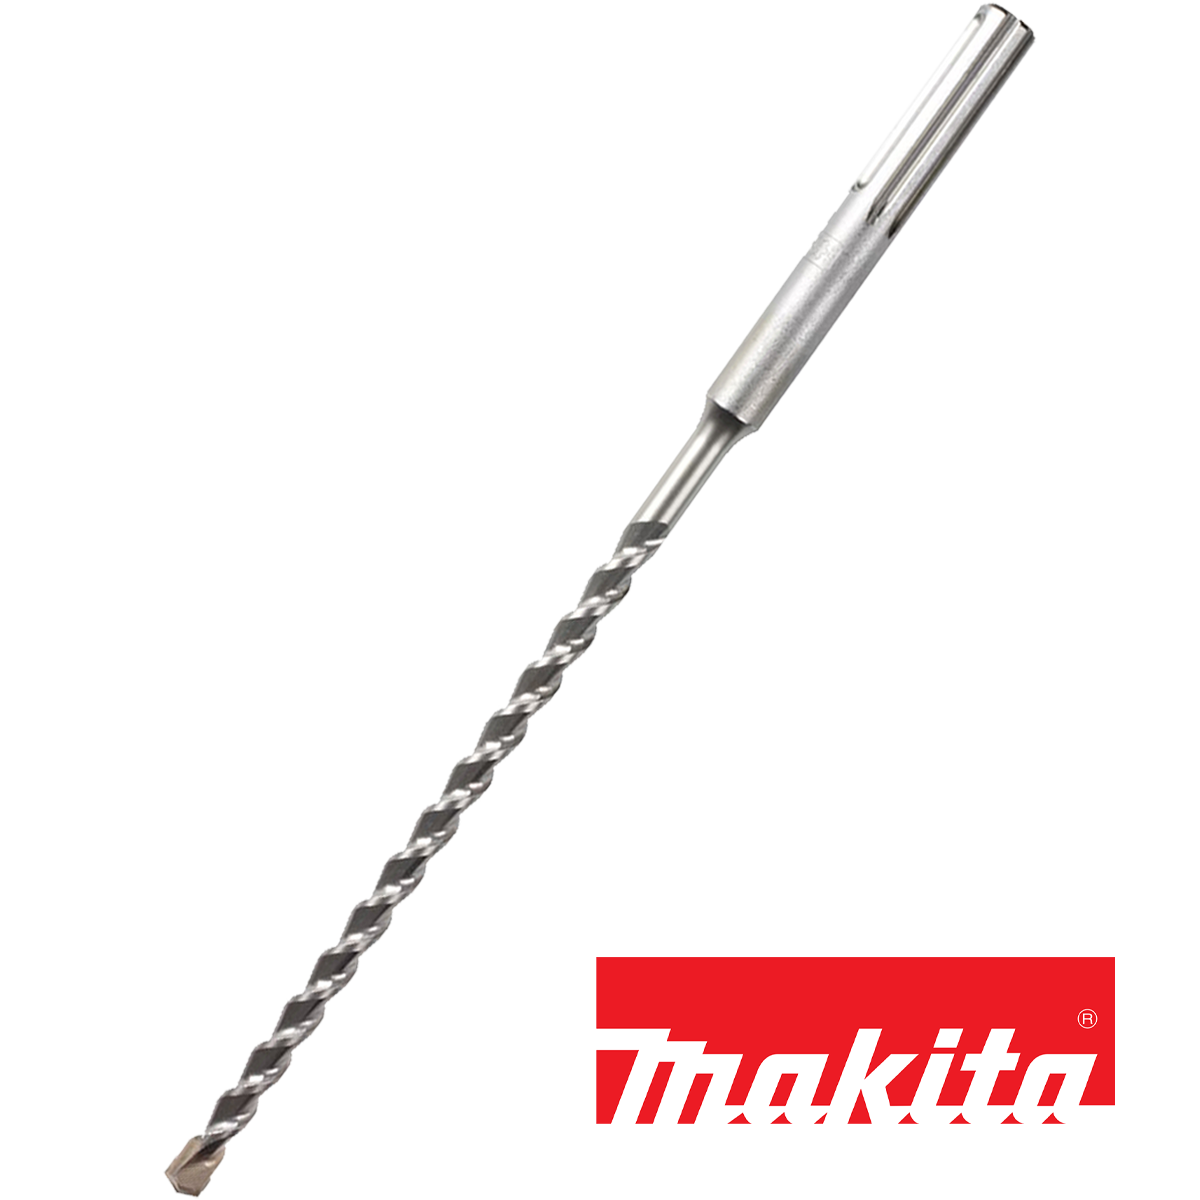 Makita SDS drill bits at competitive prices. For use with a variety of hard materials like brick, stone, concrete, and block